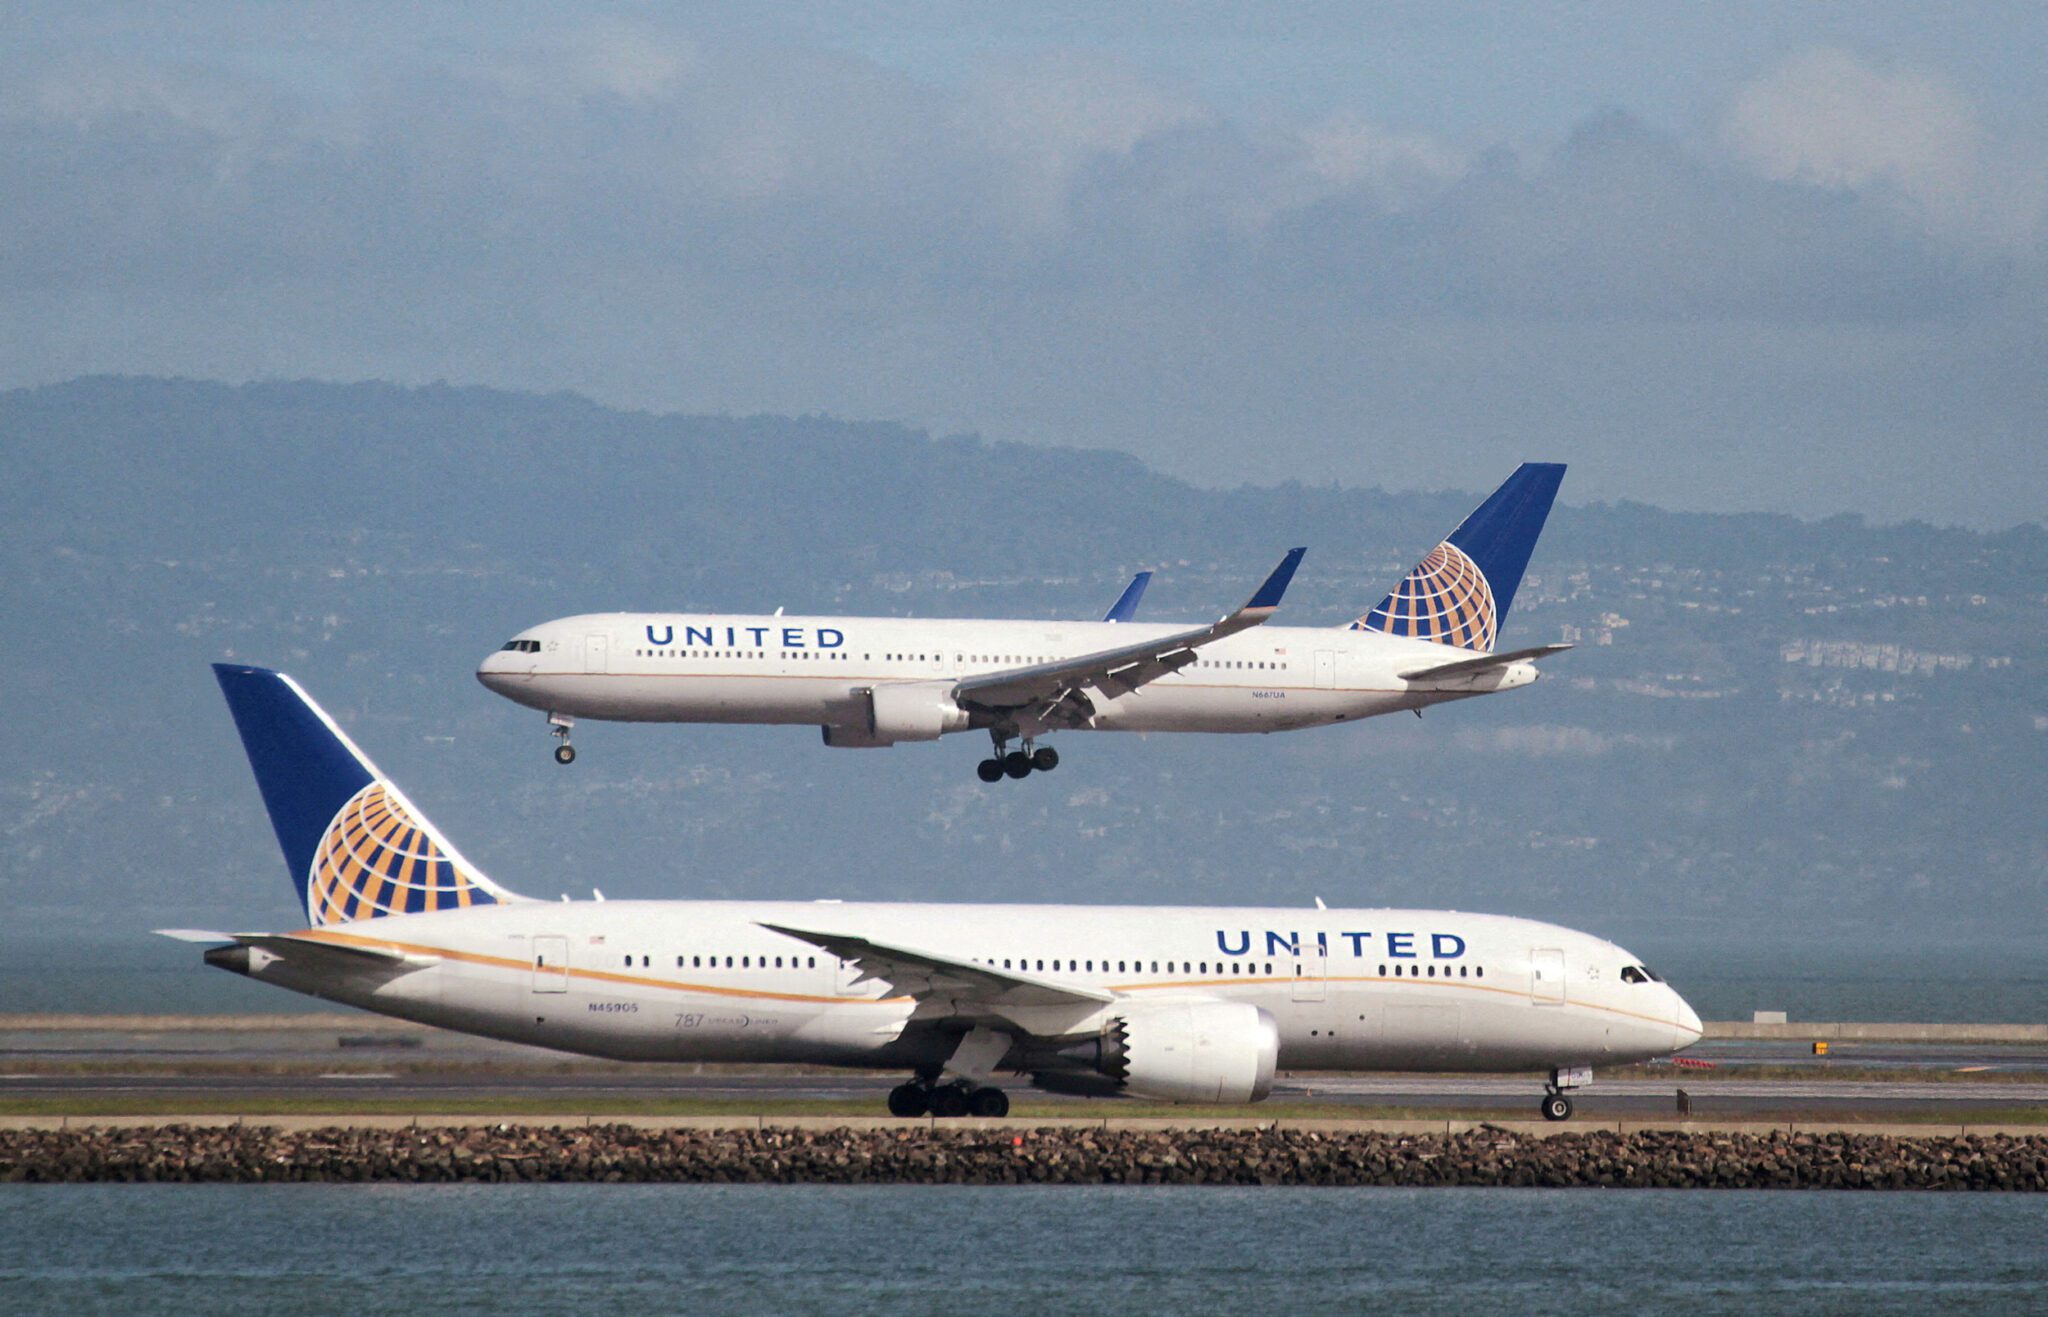 A United Airlines 787 taxis as a United Airlines 767 lands at San Francisco International Airport San Francisco. 